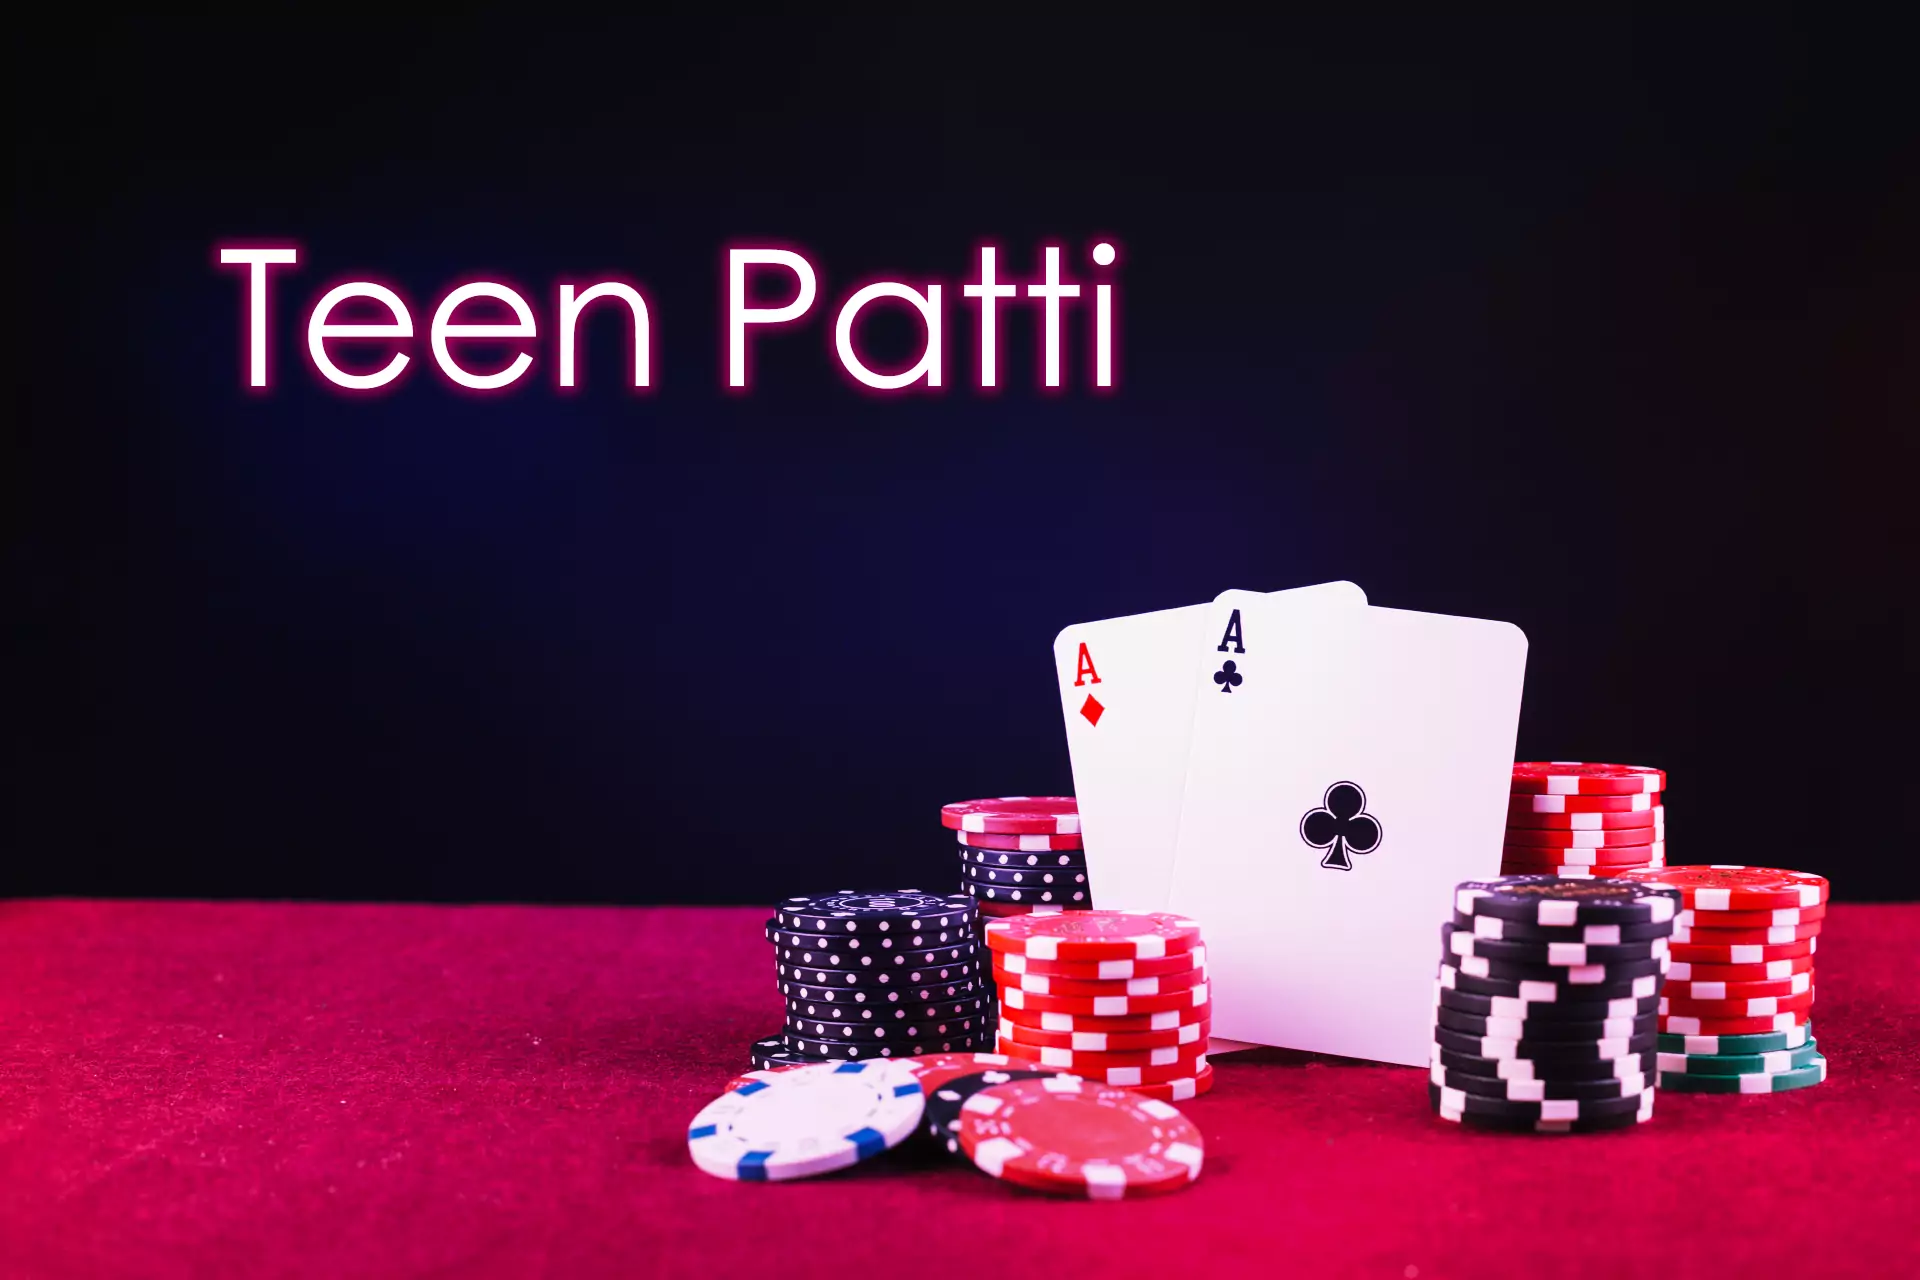 Teen Patti is an Indian version of poker that has real popularity.